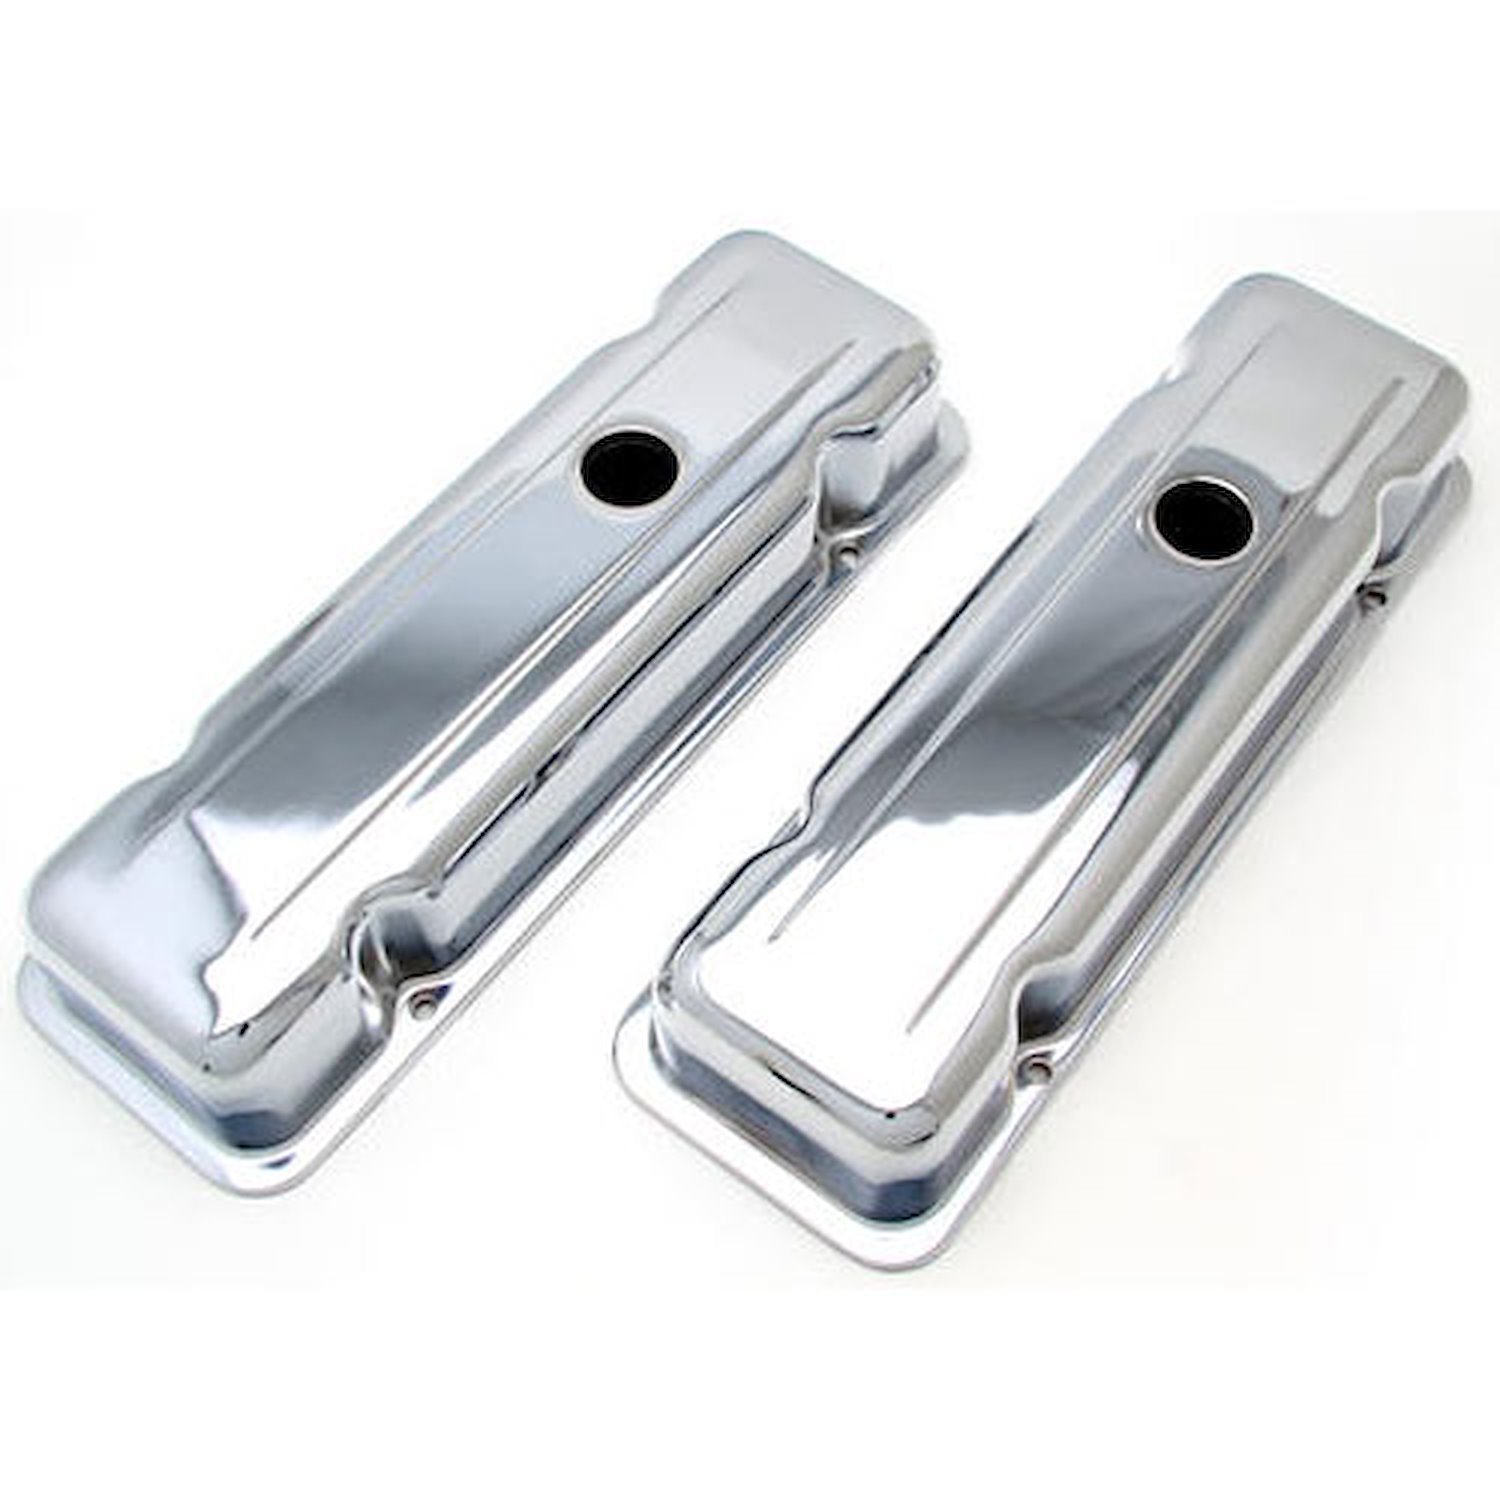 Chrome Plated Steel Valve Covers 1980-1984 Chevy 6-Cylinder 229 3.8L 90° V6